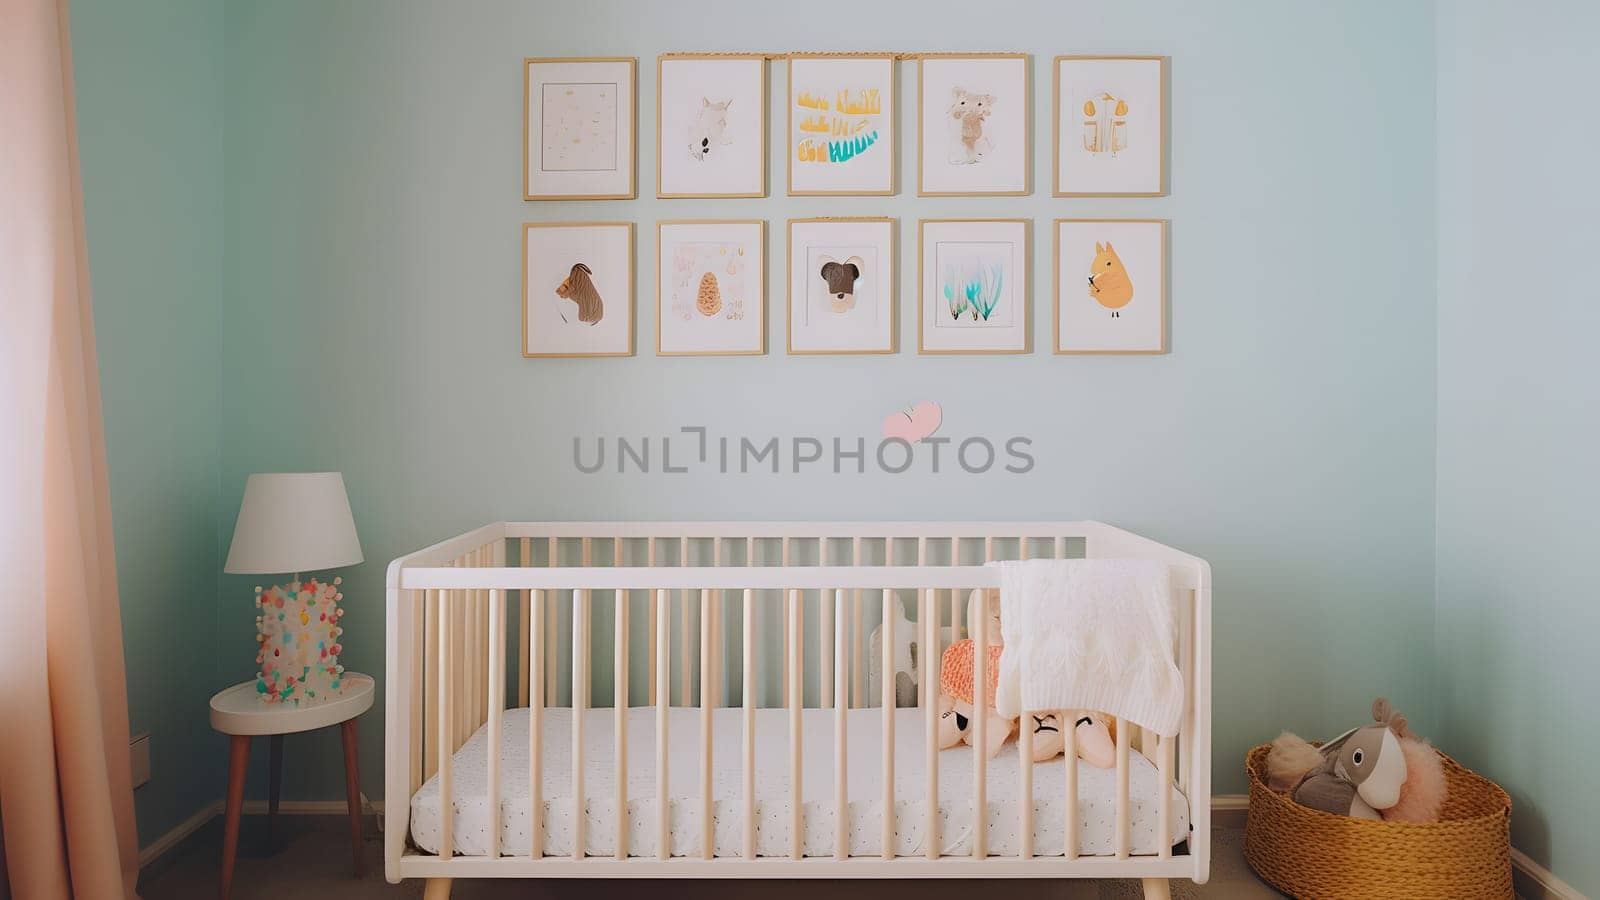 Bright white minimalist nursery wall with frames above cradle, neural network generated image by z1b